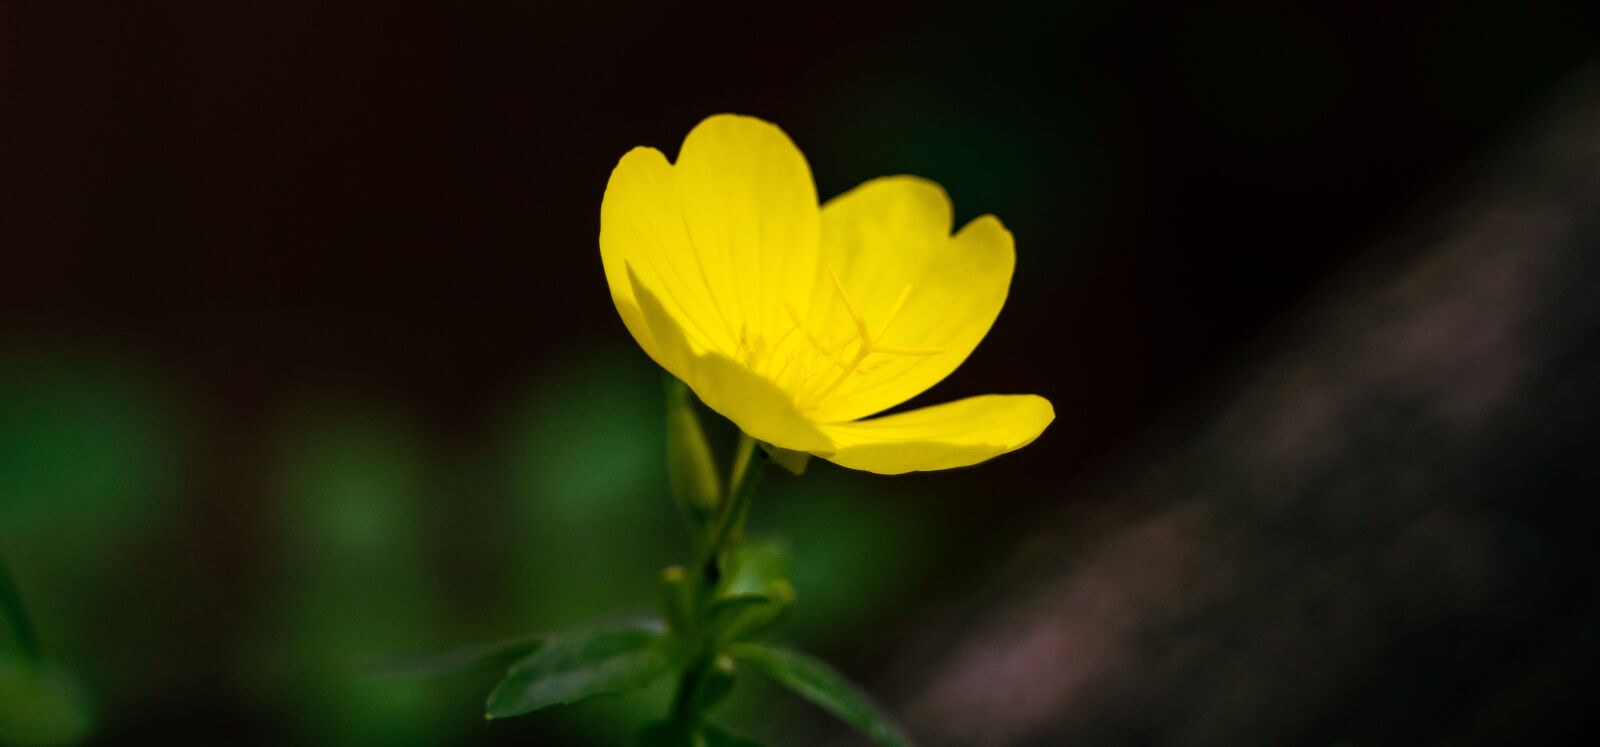 Sony a6300 + Tamron 28-75mm F2.8 Di III RXD sample photo. Flower, yellow, nature photography